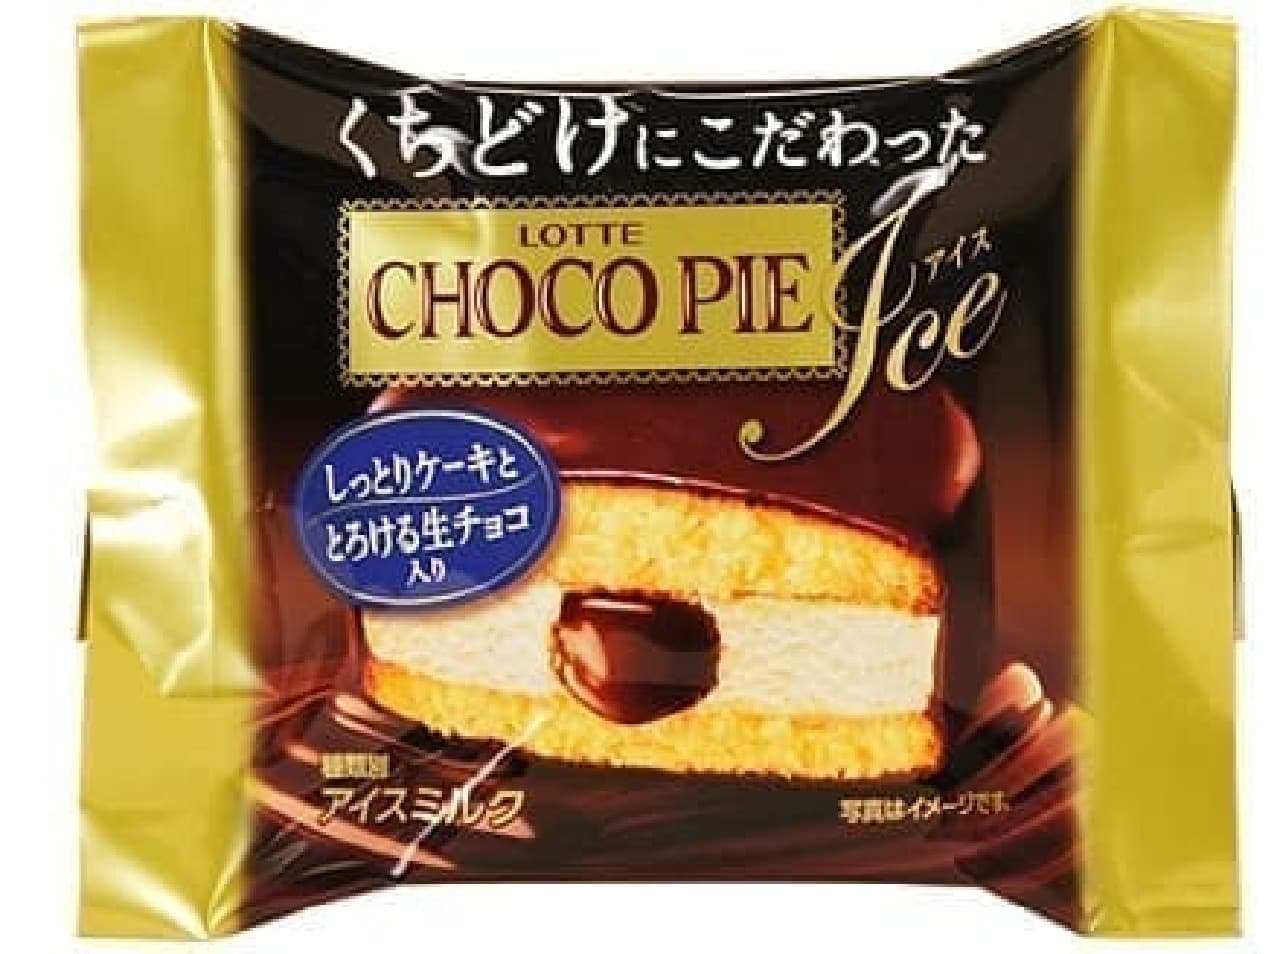 Choco pie ice cream that is particular about Lotte